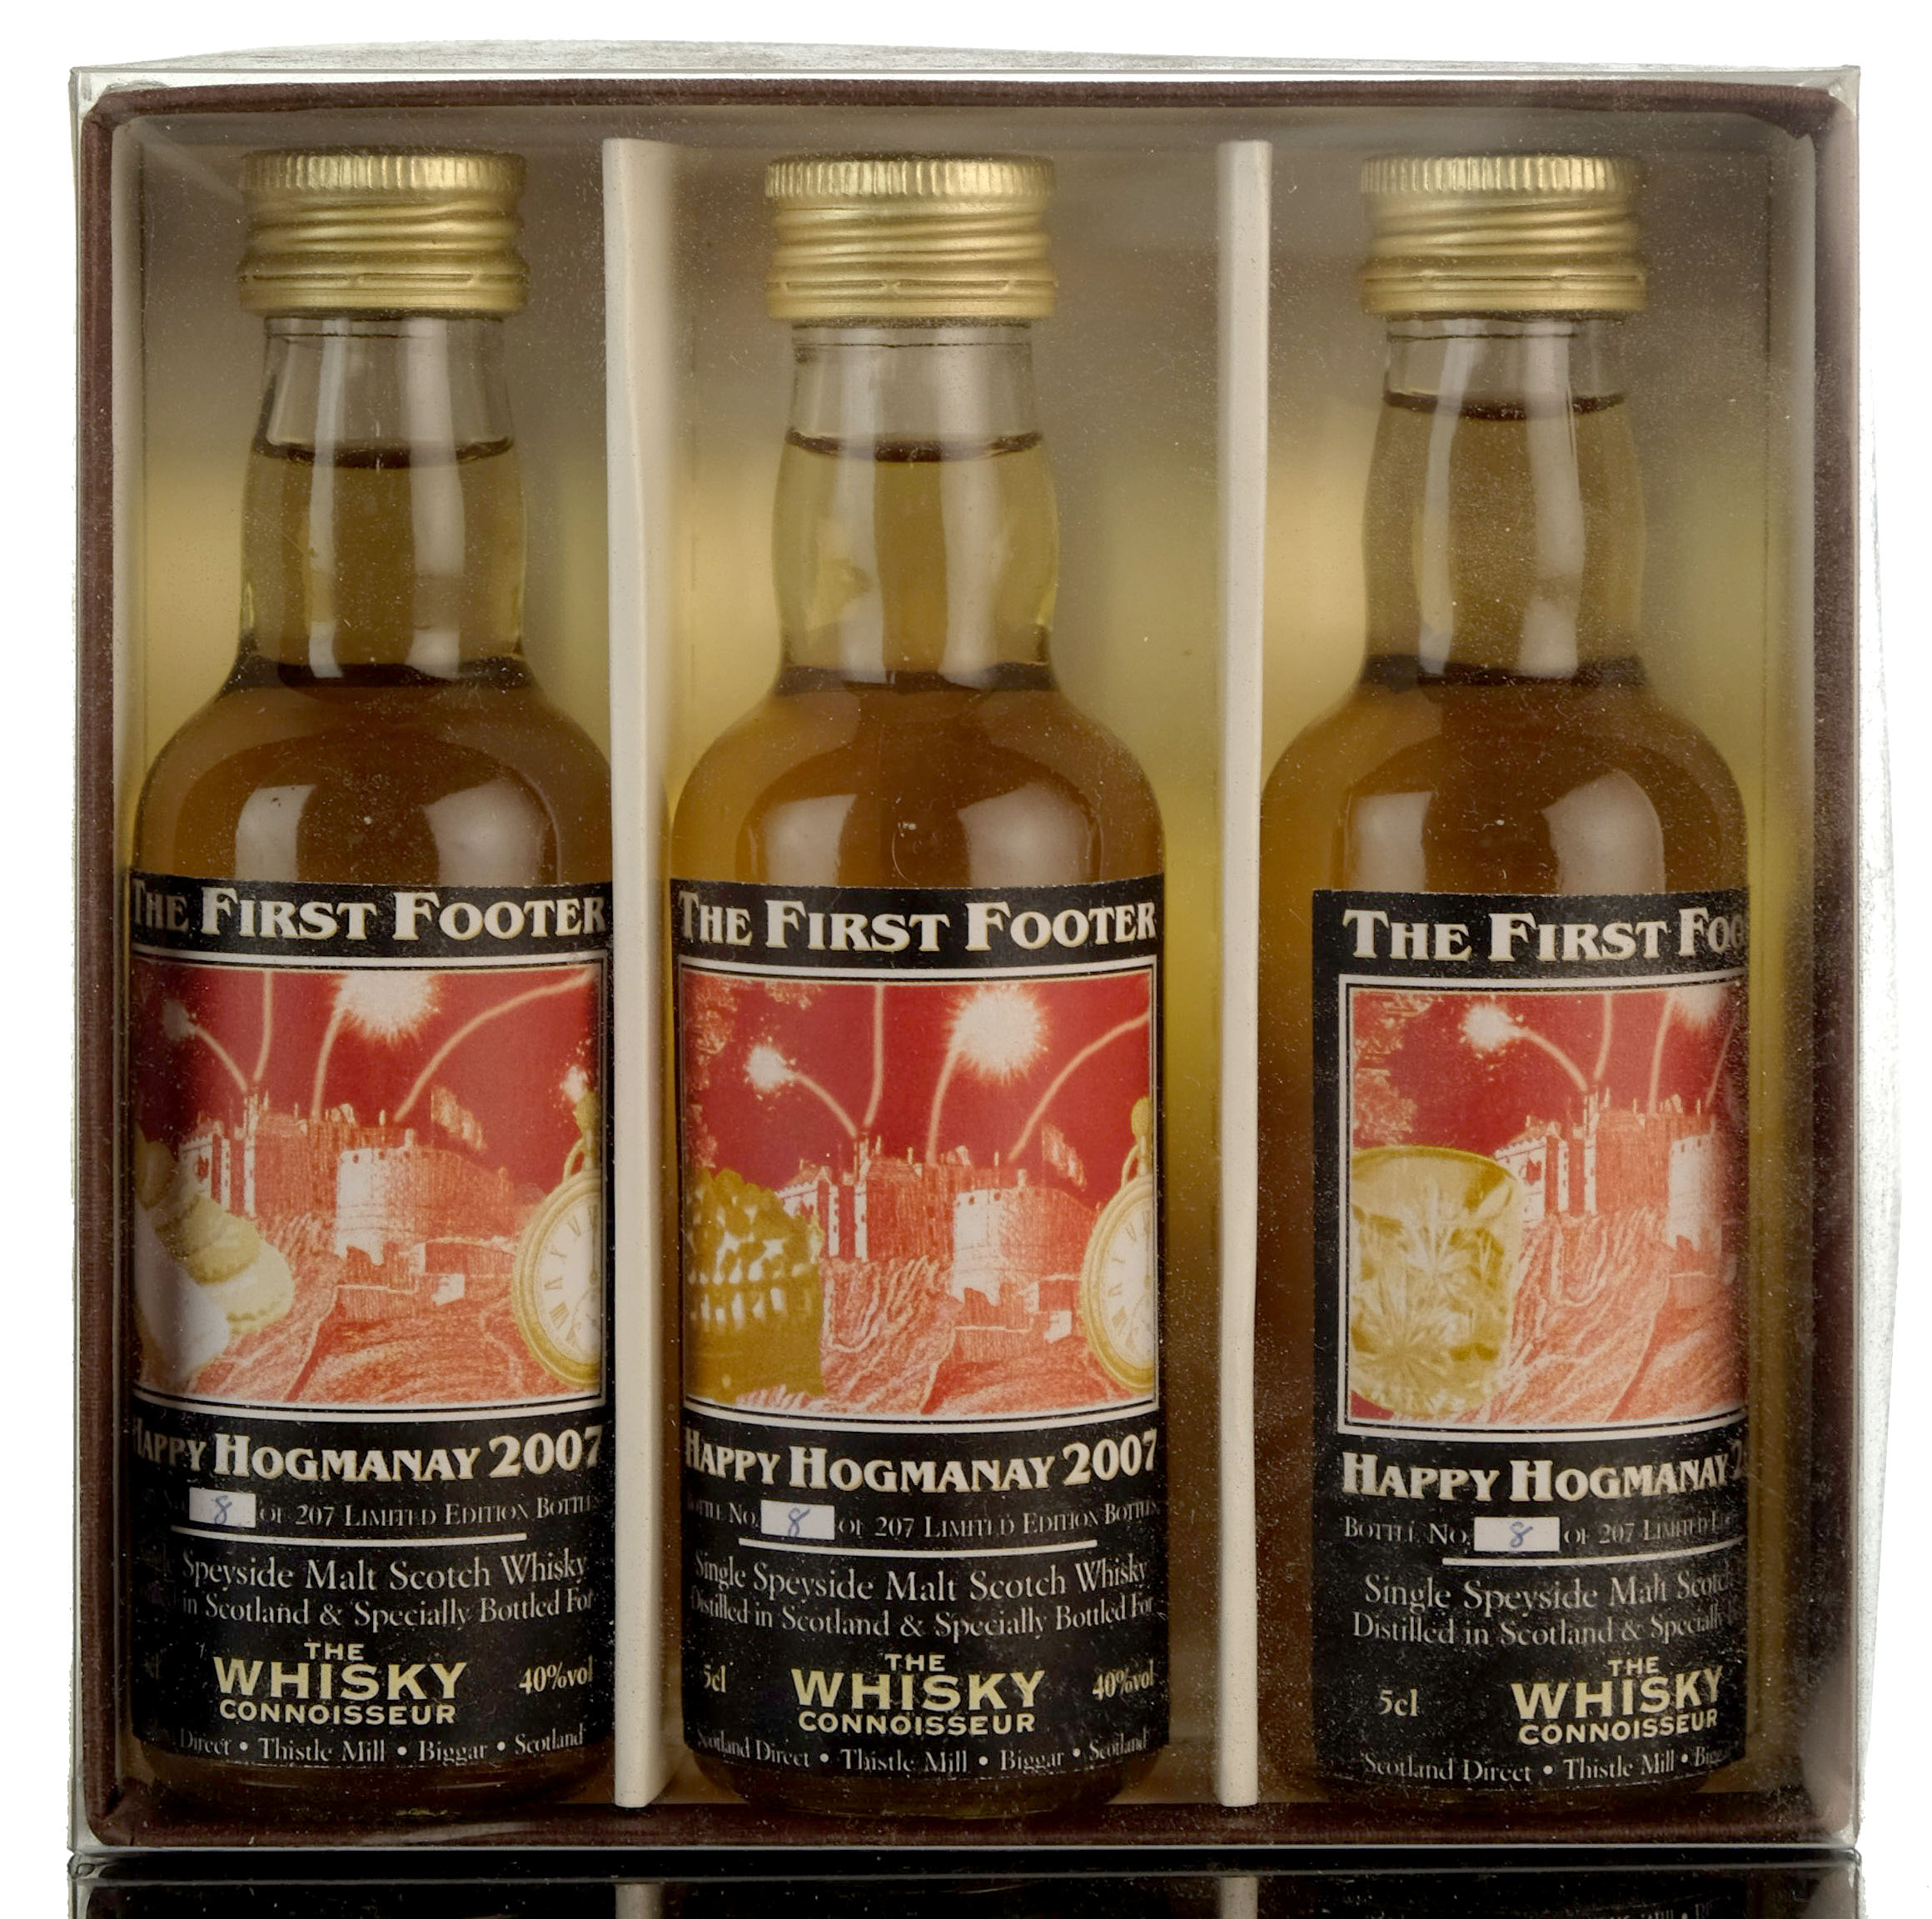 The First Footer Happy New Year 2007 - The Whisky Connoisseur - Miniature Set